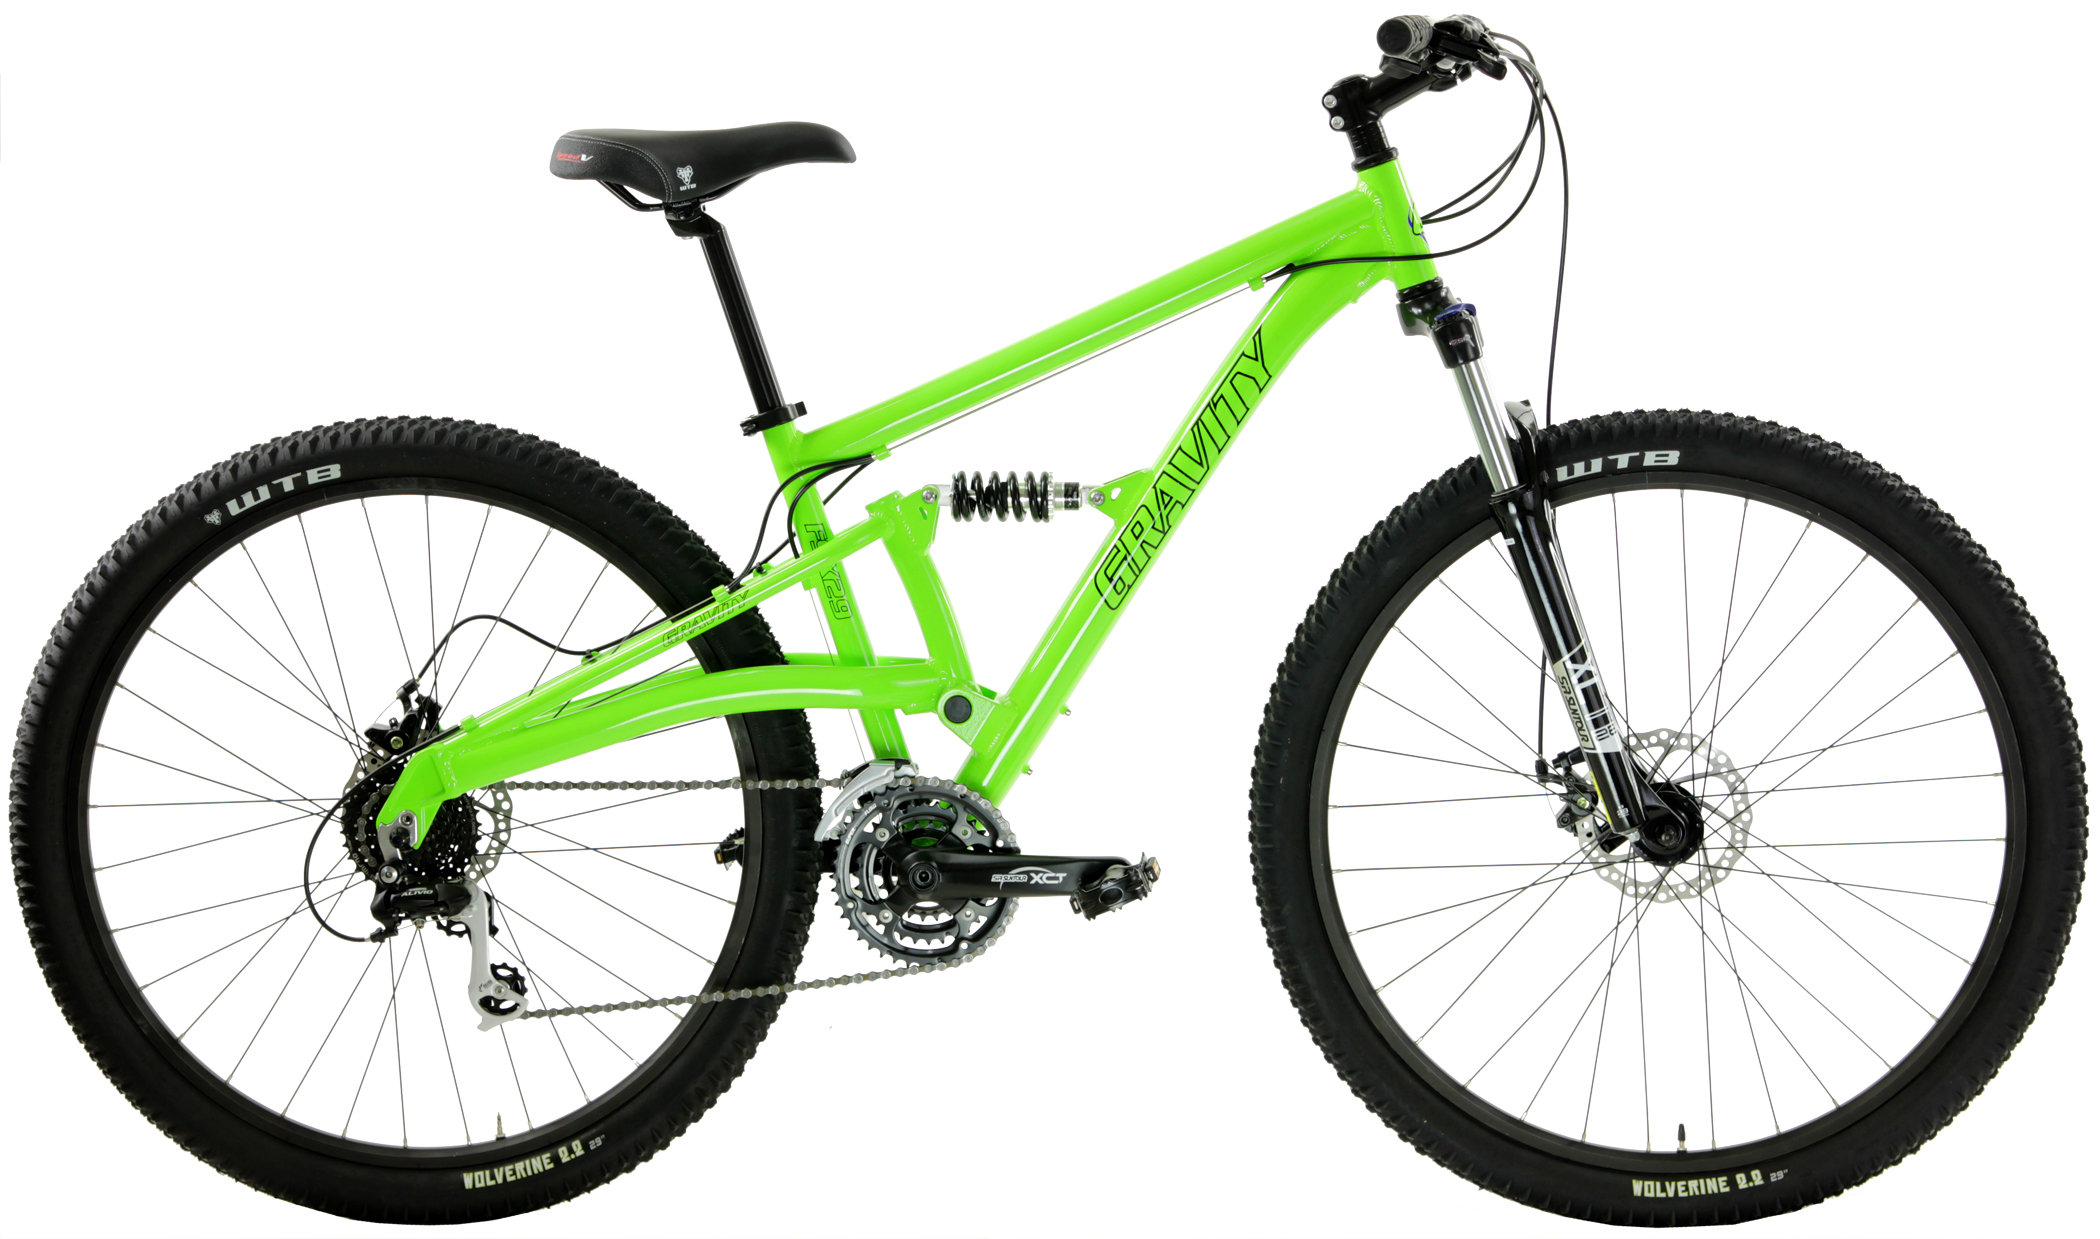 Save up to 60% off new Mountain Bikes - MTB - 29er Full Suspension